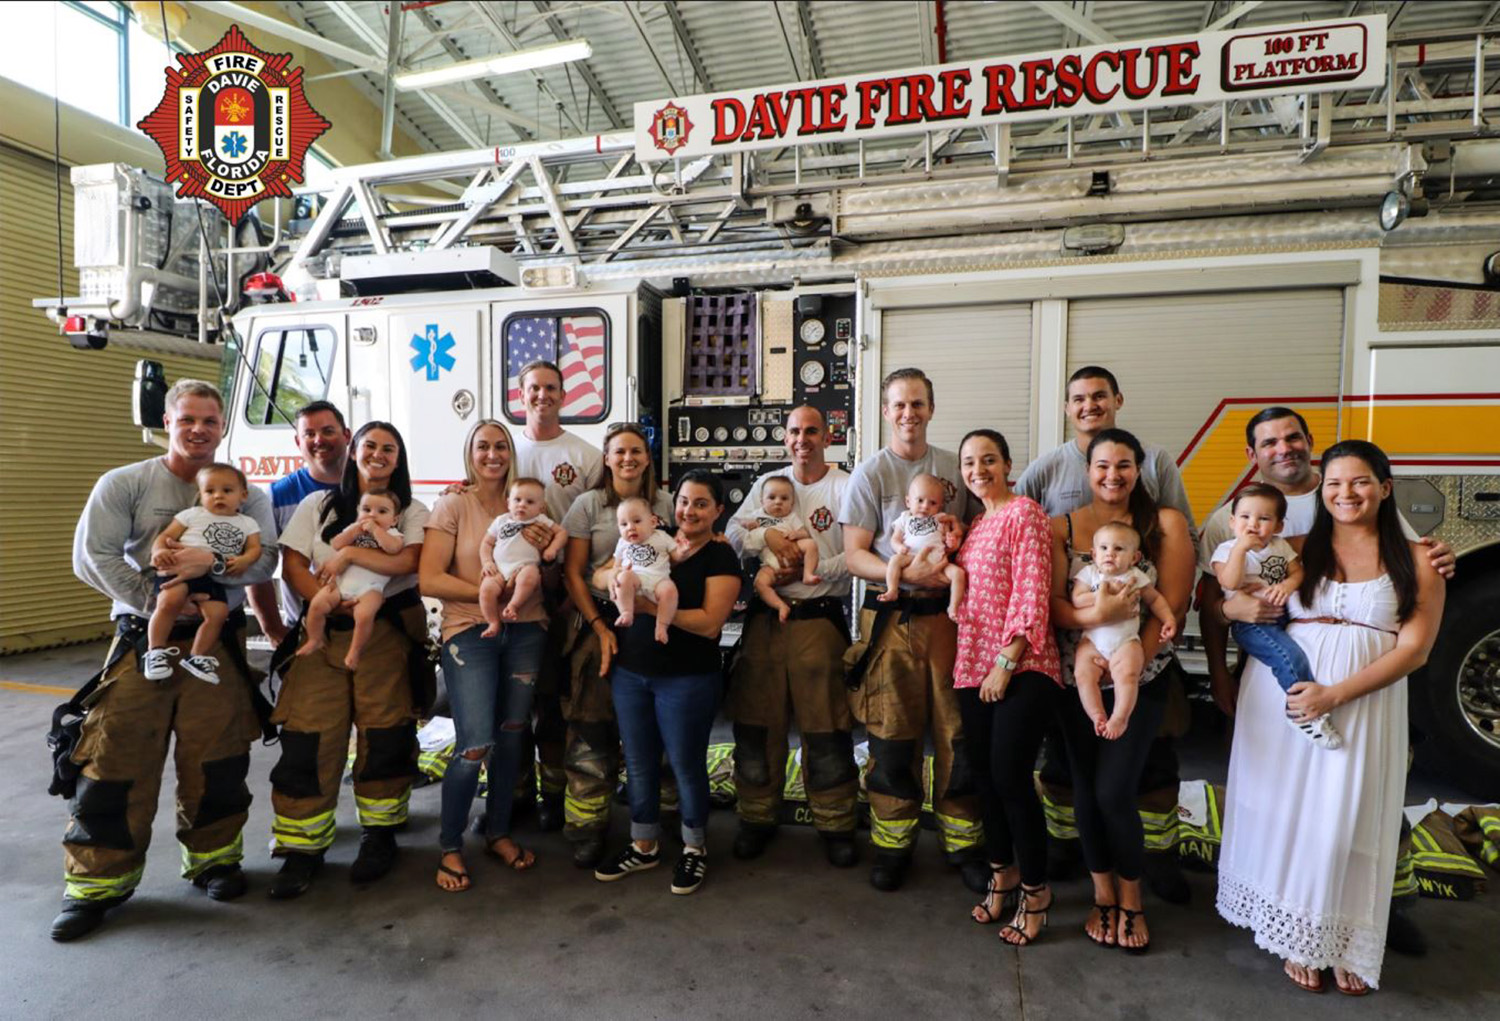 PHOTO: Firefighters in Davie, Fla, pose for a group photo with family members and babies all born in less than a year.